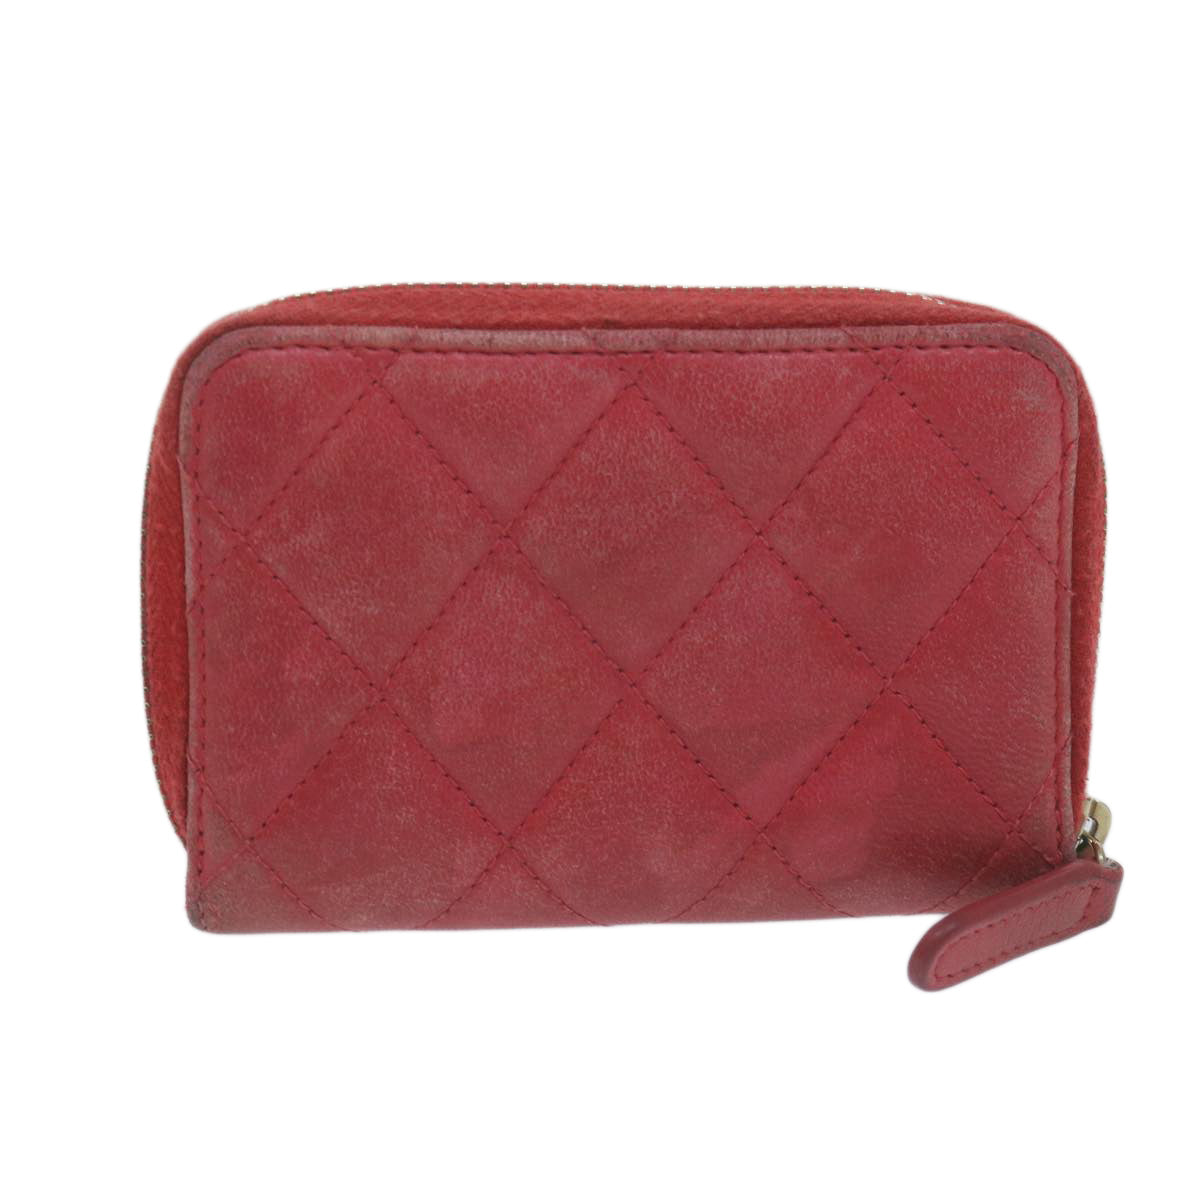 CHANEL Matelasse Coin Purse Lamb Skin Red CC Auth 65239 - 0